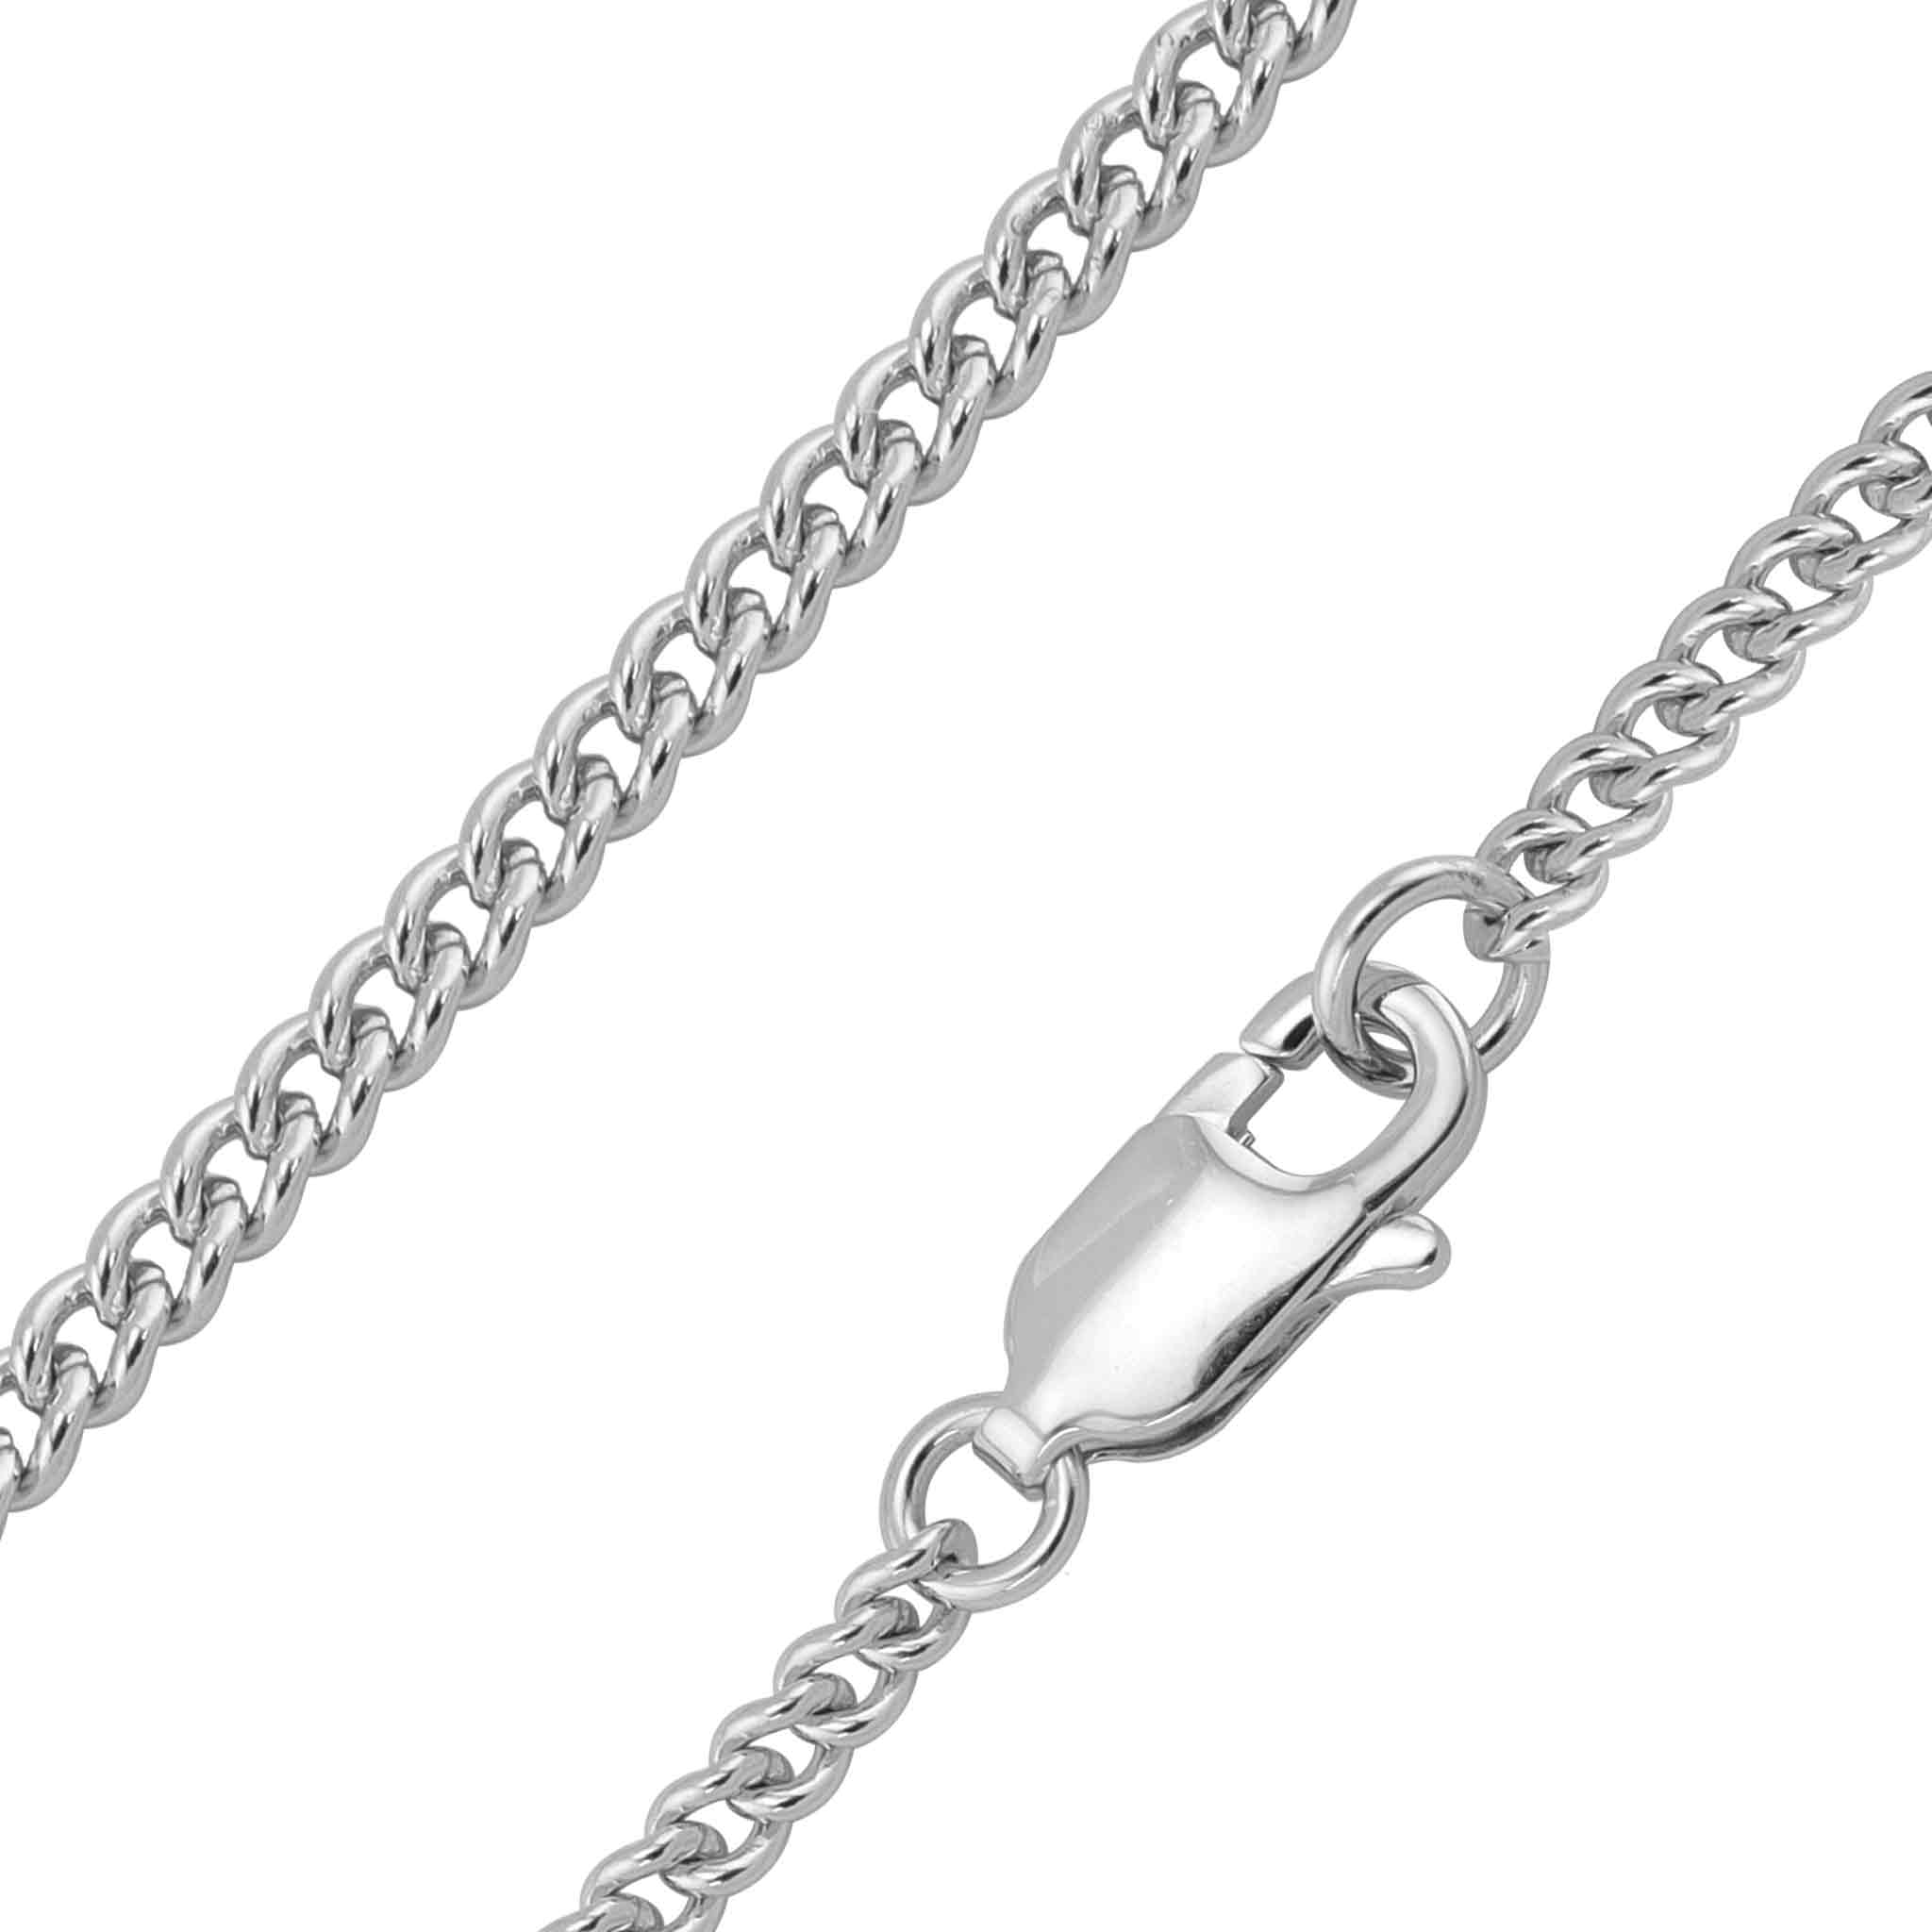  30 Pack Necklace Chains 2mm Stainless Steel Link Cable